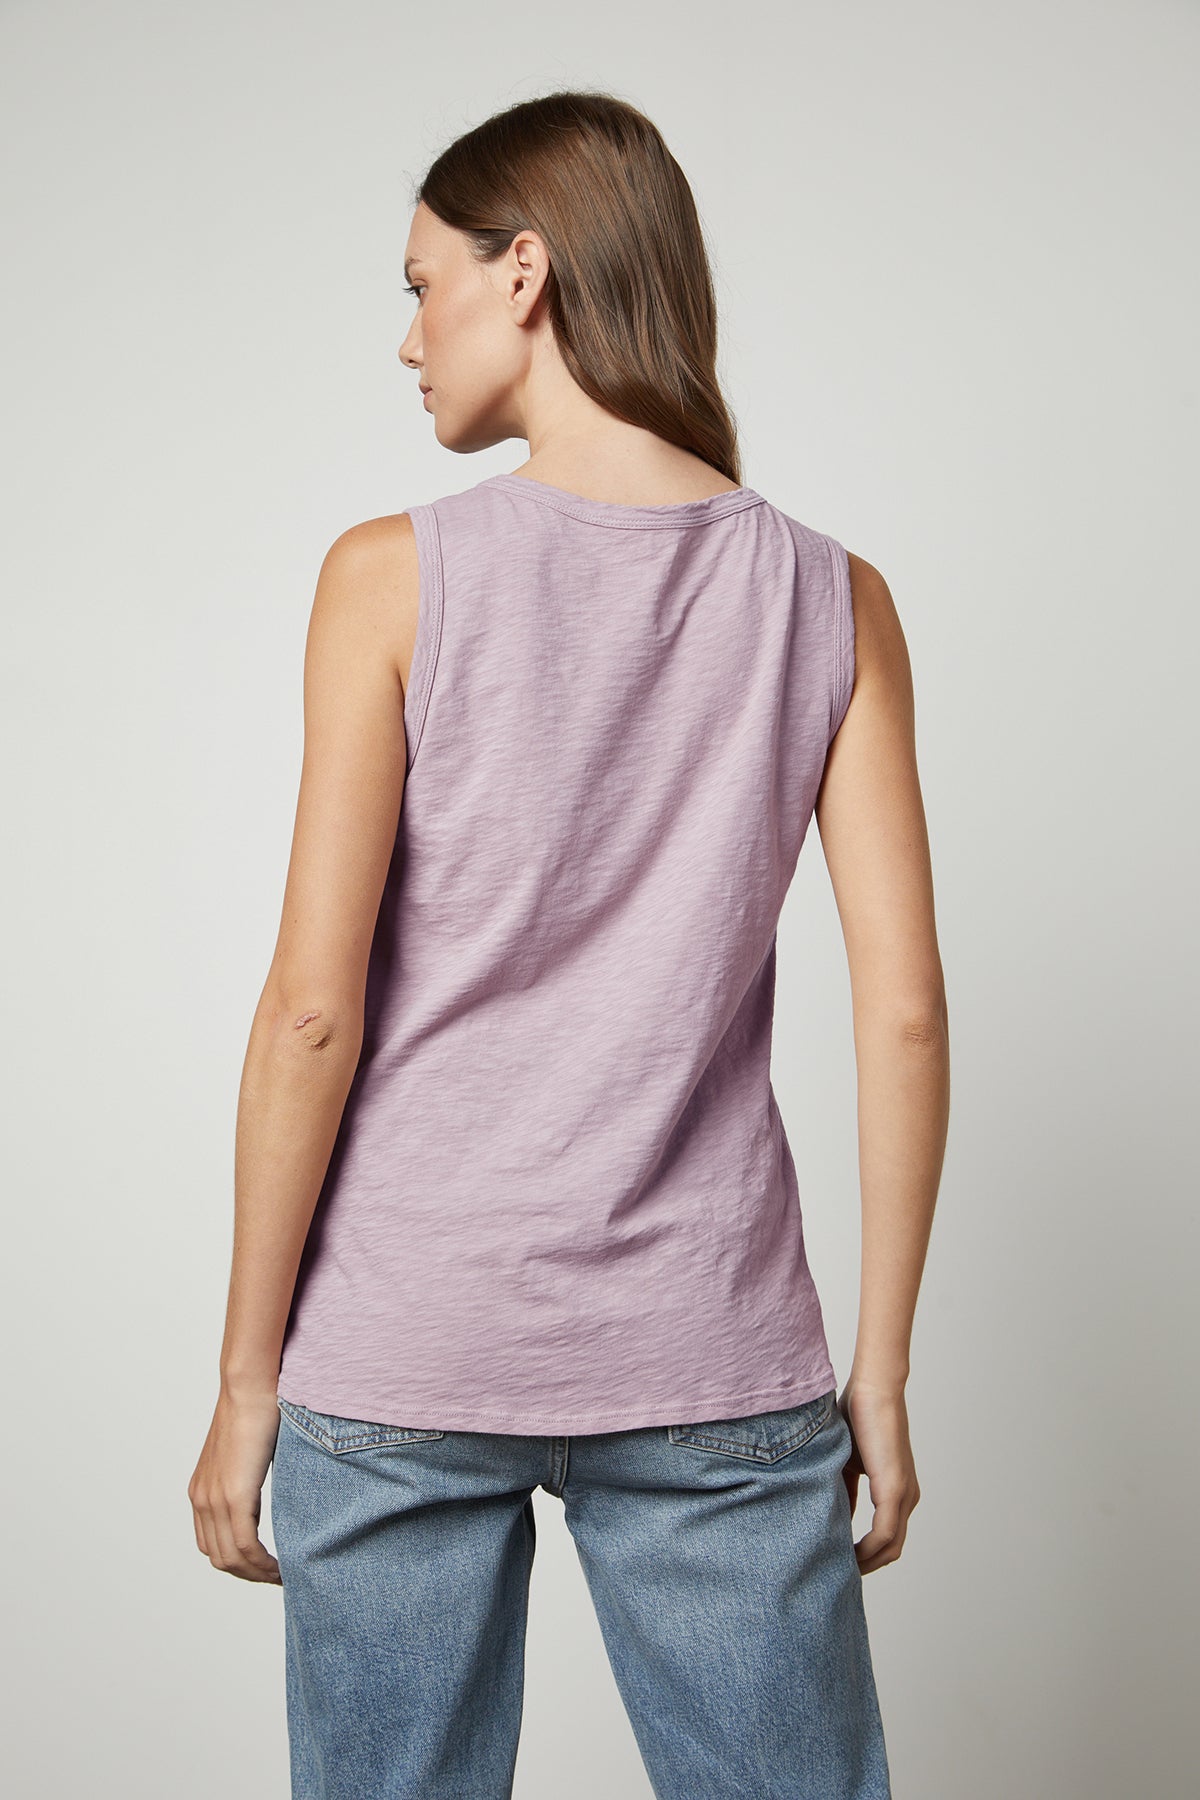 The back view of a woman wearing the Velvet by Graham & Spencer TAURUS COTTON SLUB TANK.-26632368947393